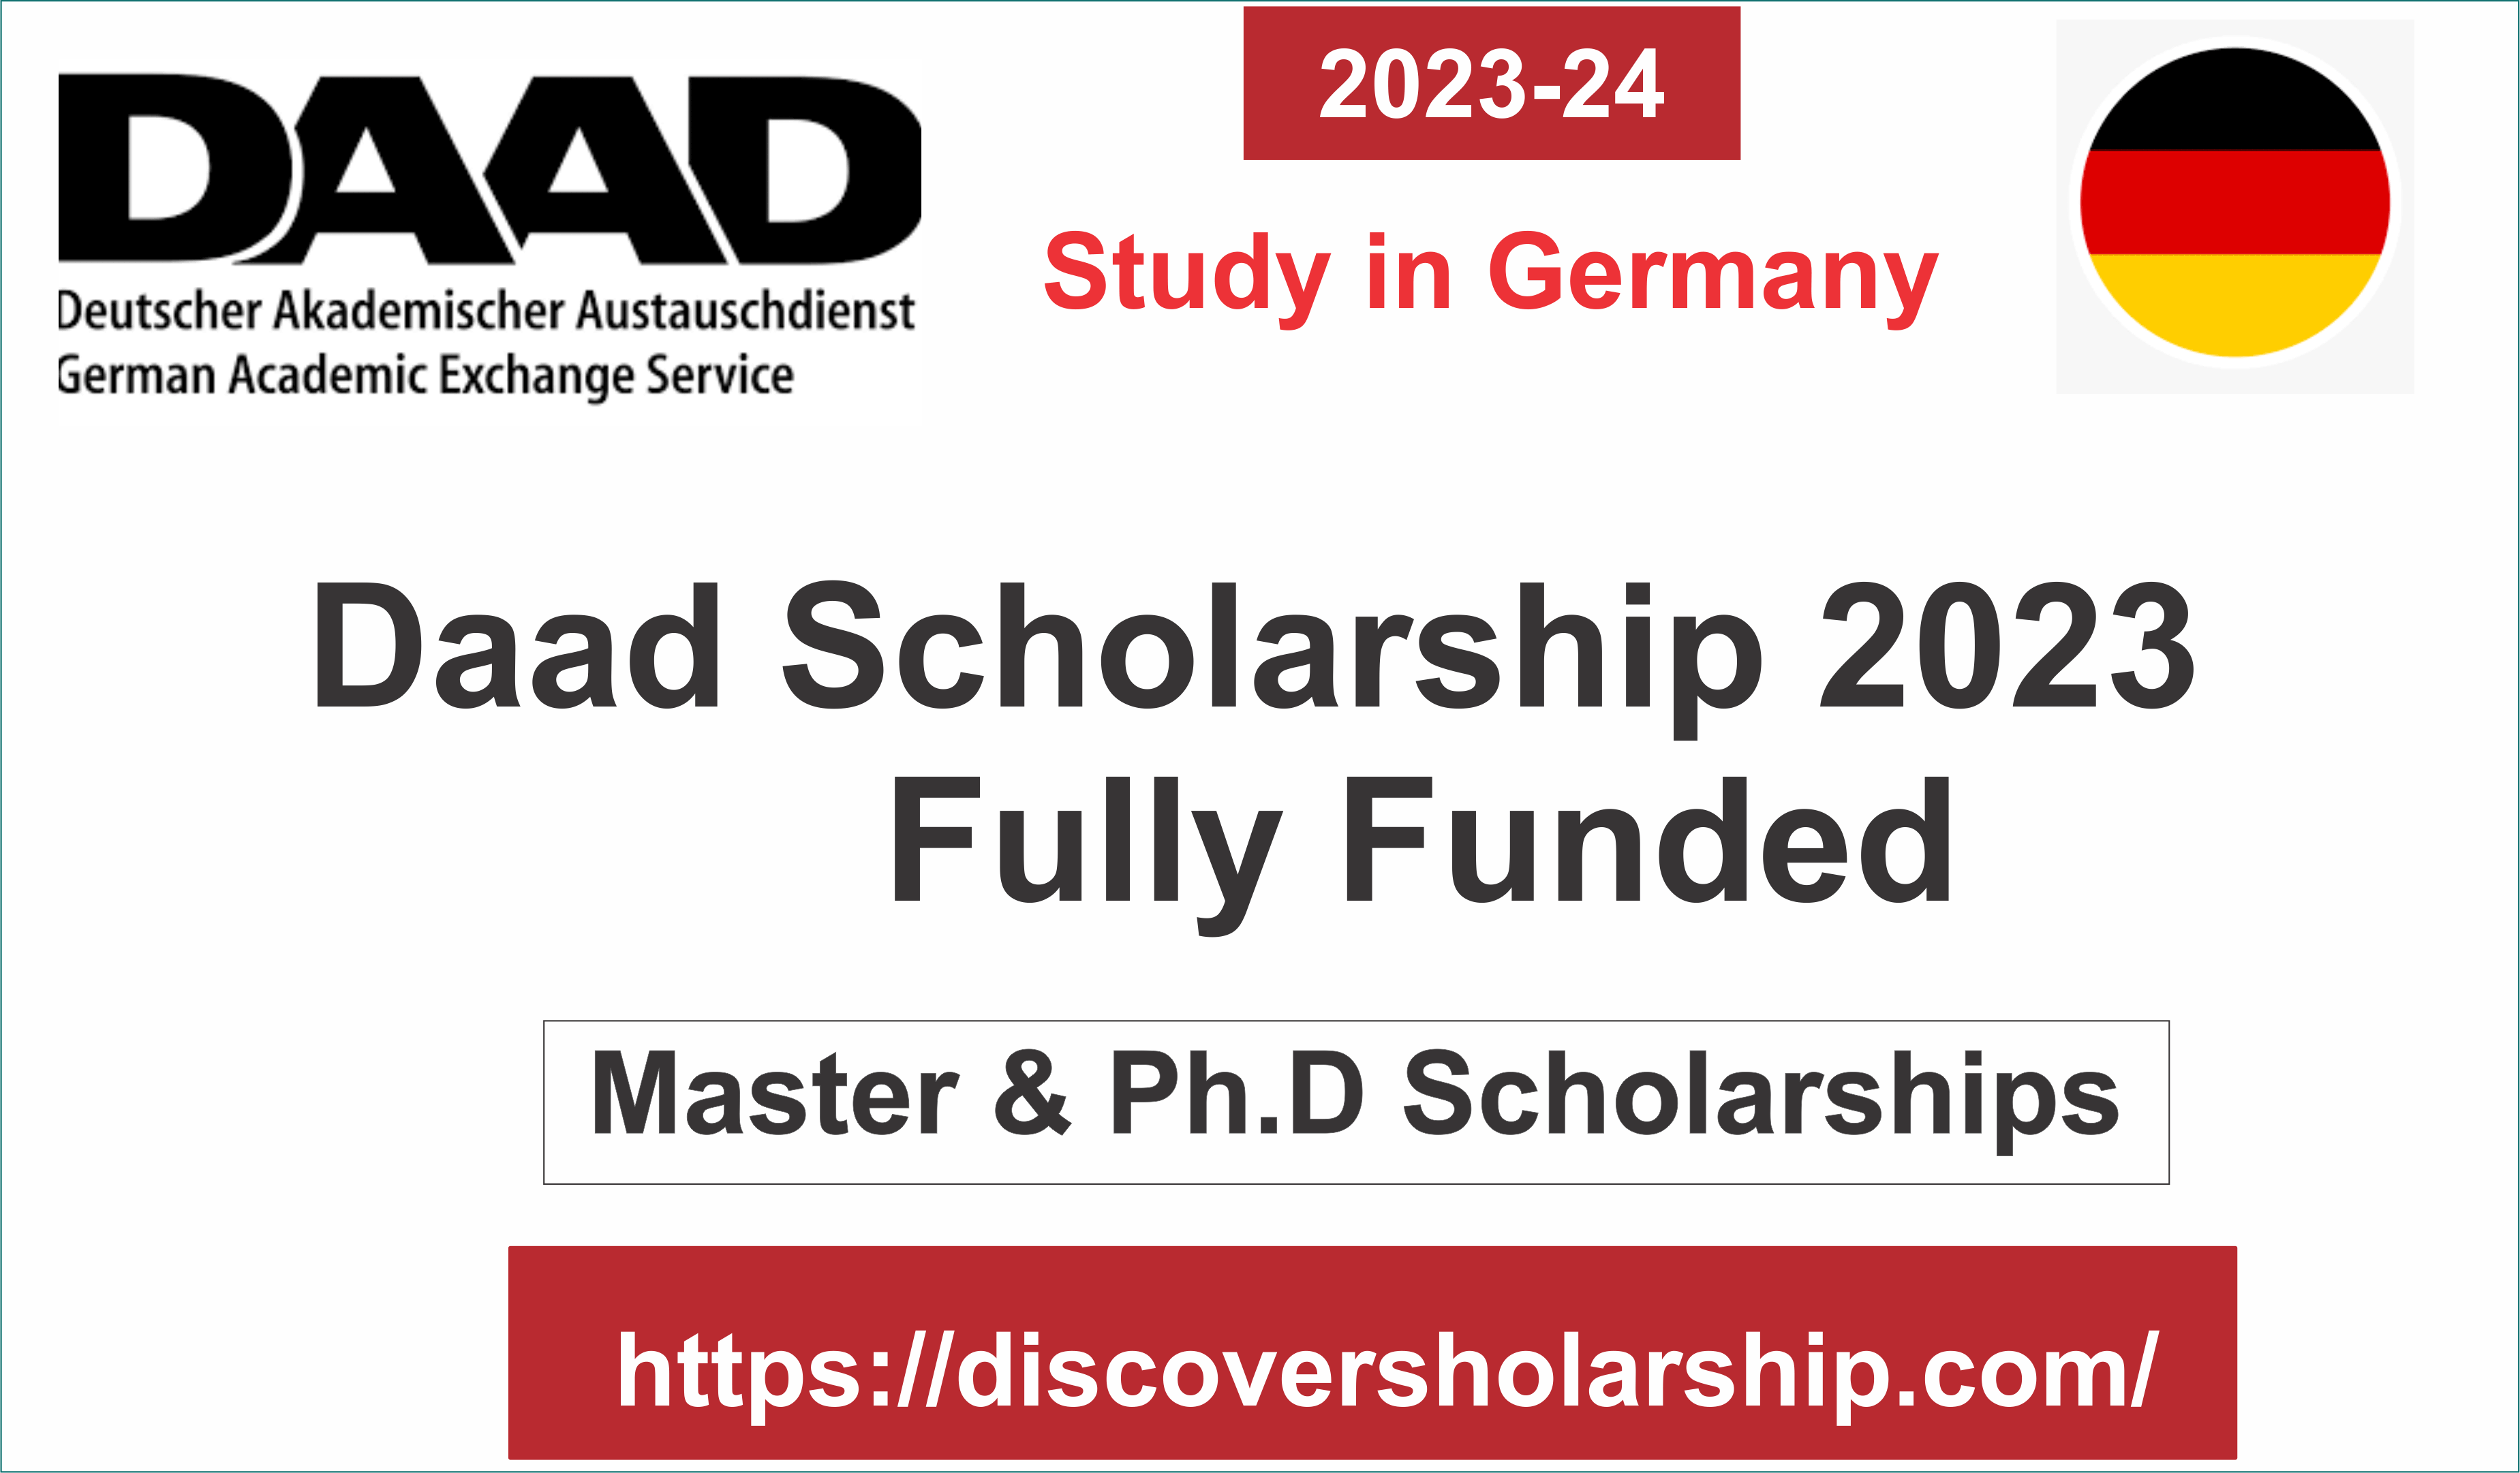 DAAD Scholarship in Germany 202324 fully funded